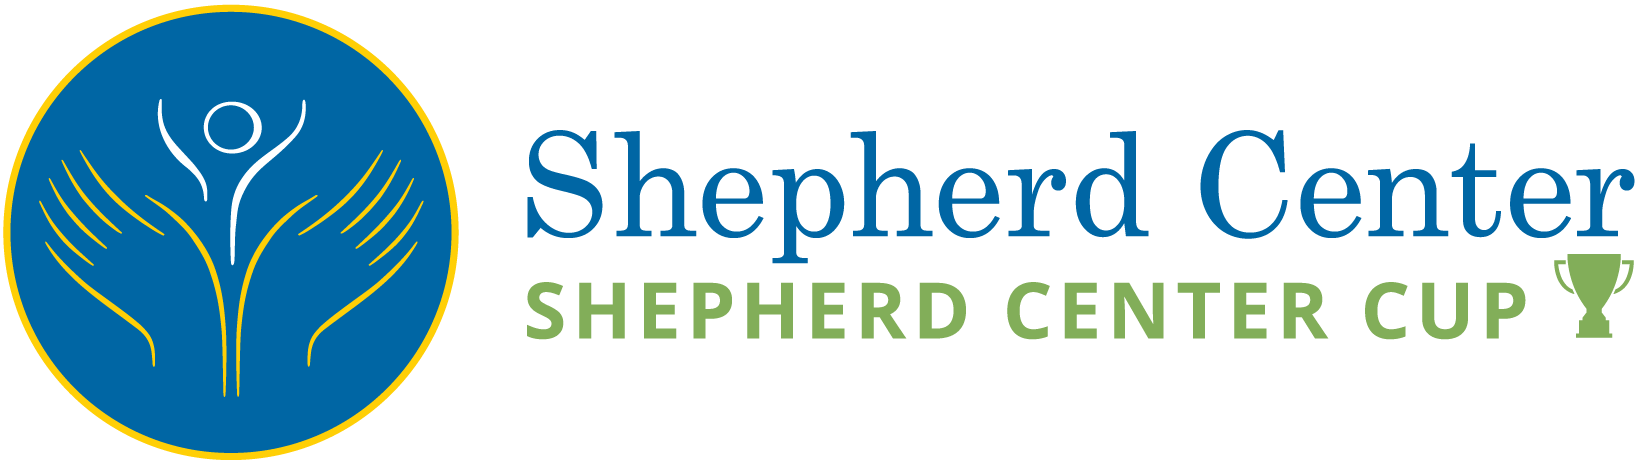 Shepherd Center Cup annual charity golf and fundraiser logo